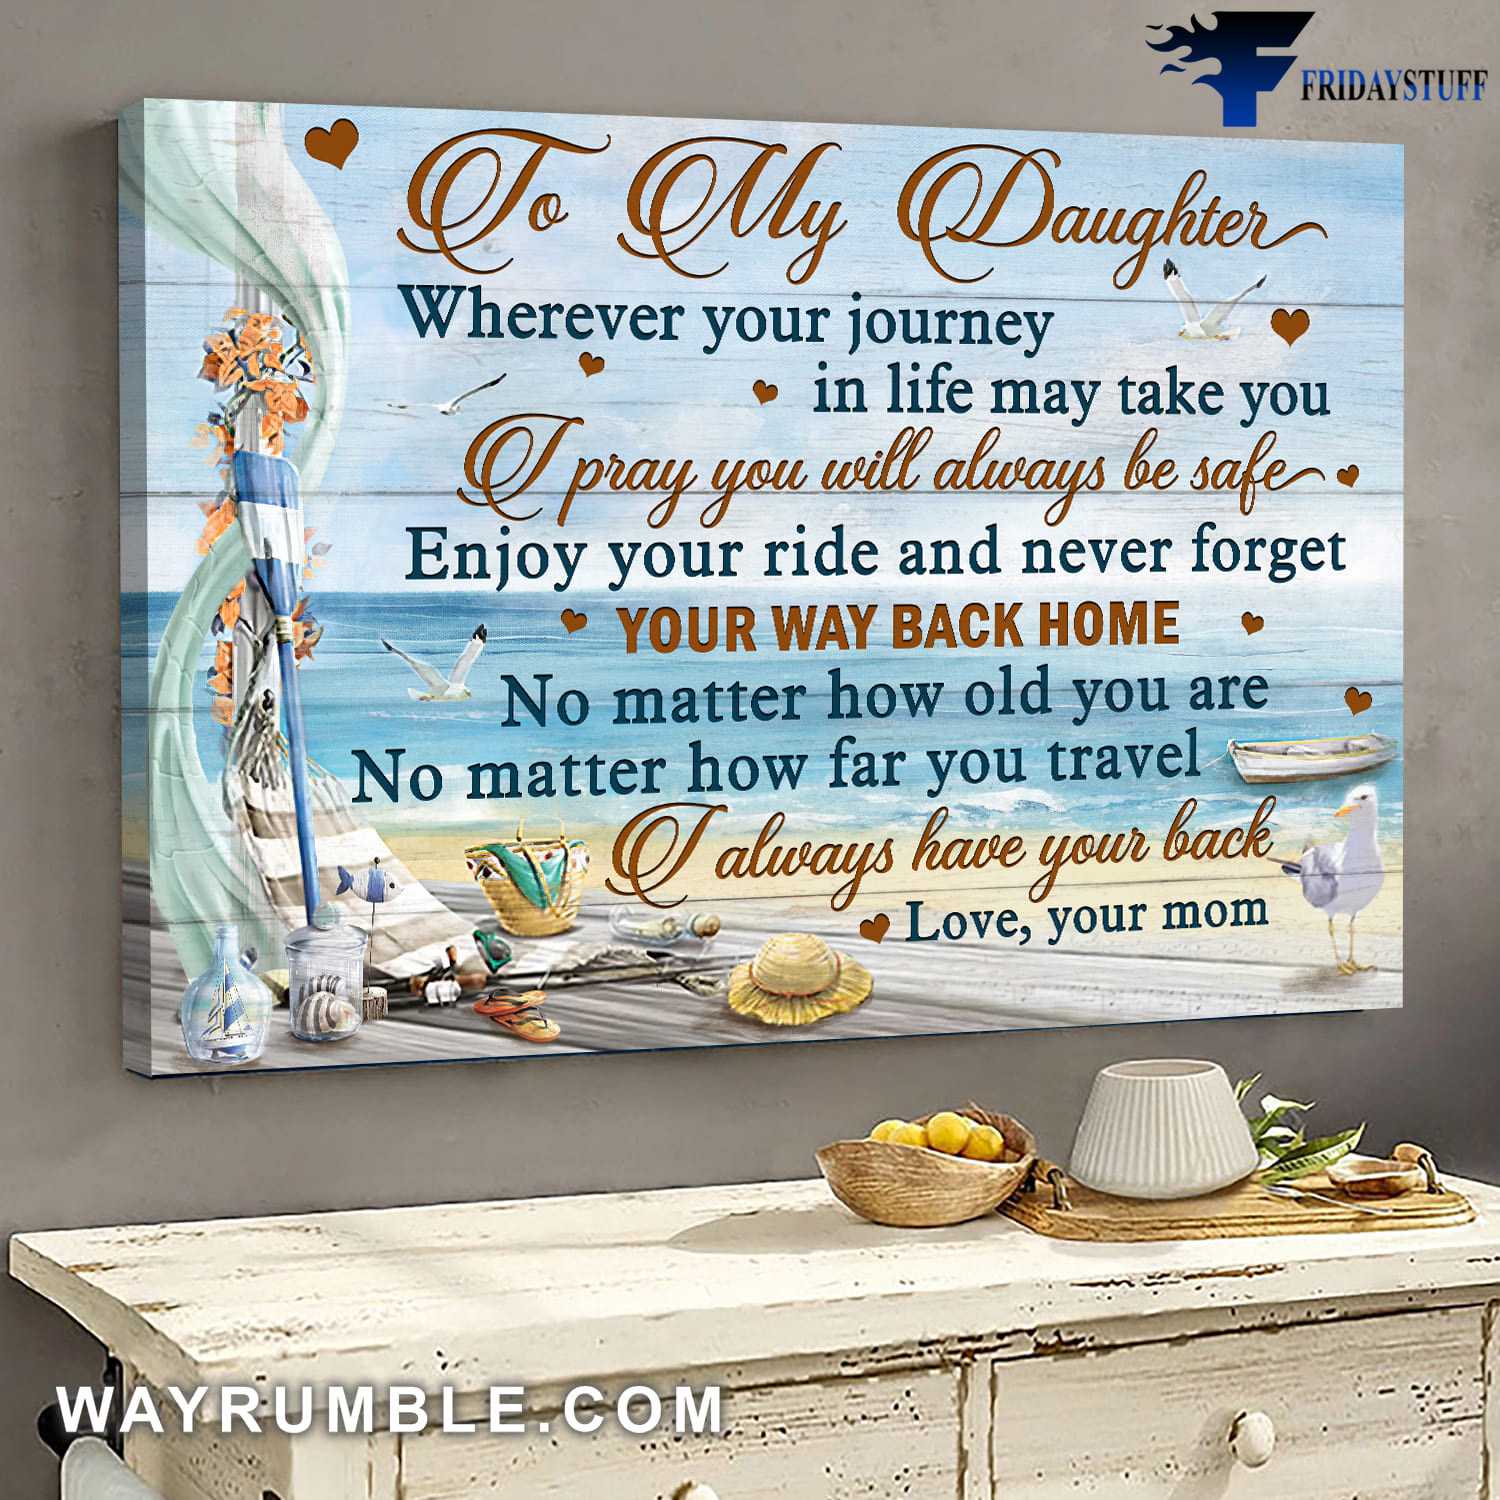 Beach Scenery, Mom And Daughter, To My Son, Whenever You Journey In life, May Take You, I Pray You’ll Always Be Safe, Enjoy The Ride And Never Forget, Your Way Back Home, I Can’t Promise To Be Here